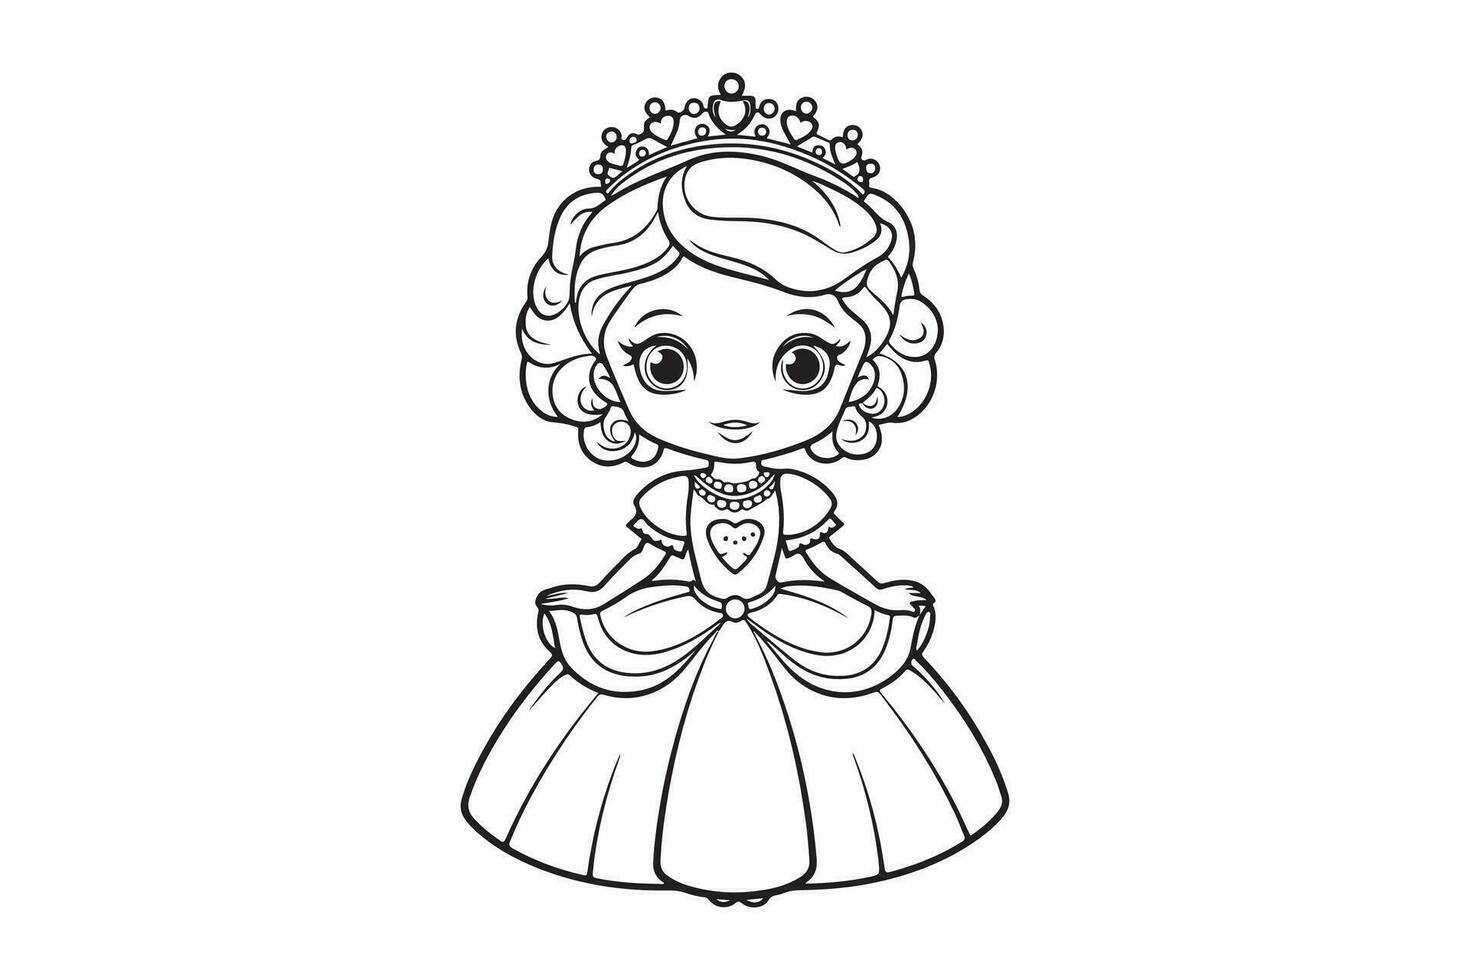 https://static.vecteezy.com/system/resources/previews/031/374/987/non_2x/best-printable-coloring-pages-for-kids-coloring-pages-with-girls-characters-vector.jpg